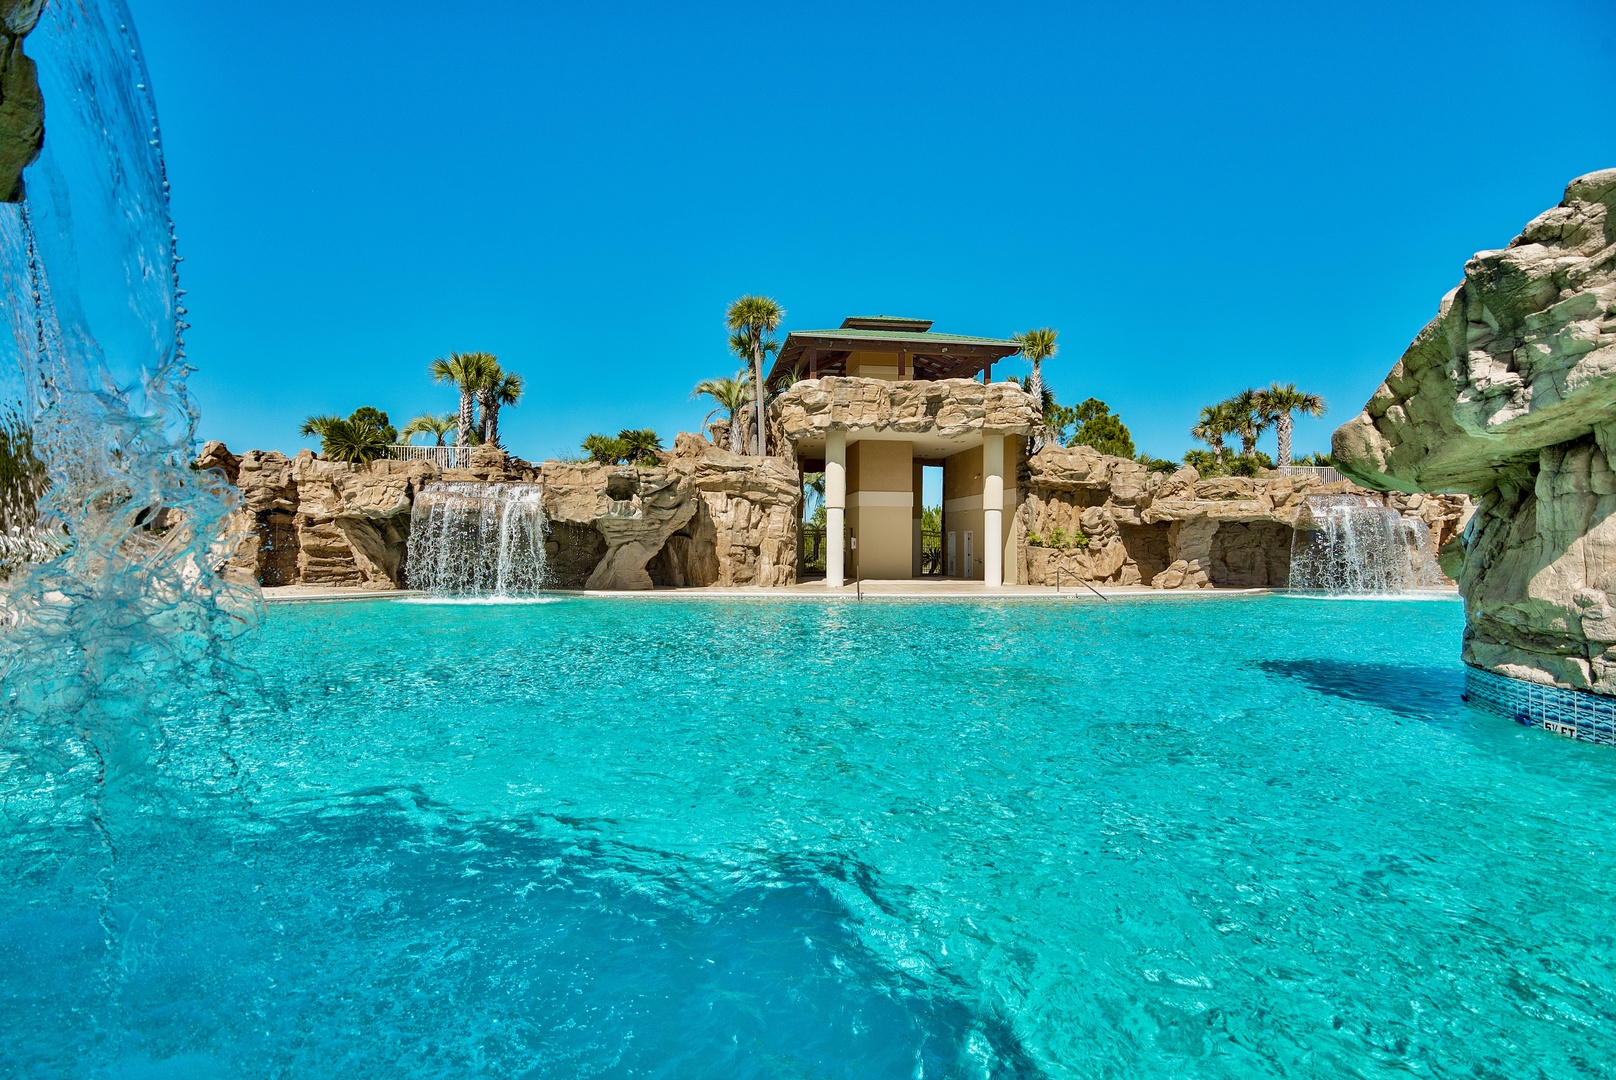 The amazing neighborhood pool features grottos, waterfalls, and more!